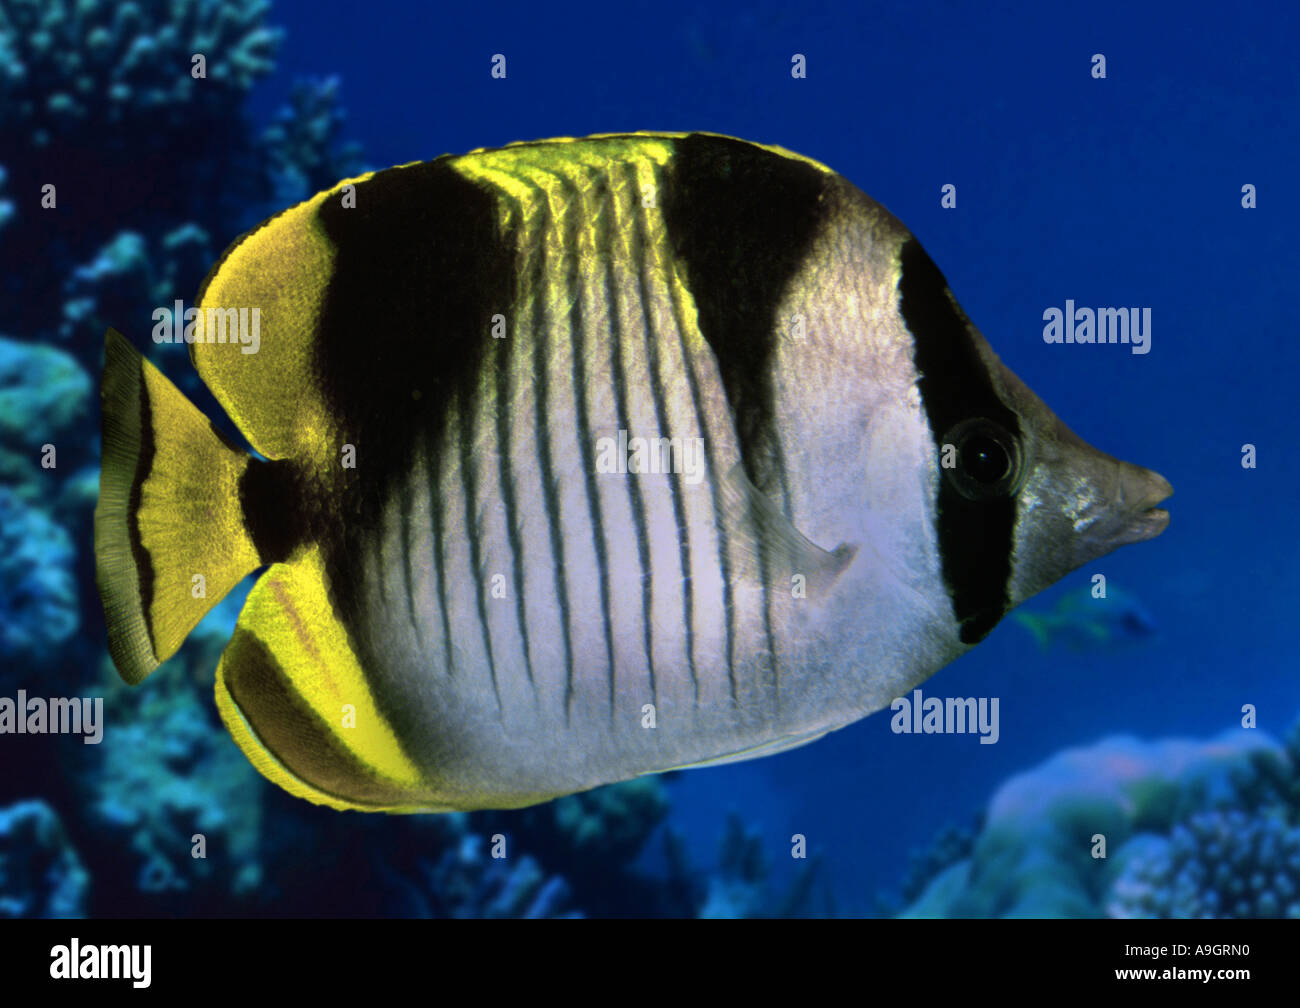 sickle butterflyfish, blackwedged butterflyfish (Chaetodon falcula), distribution: Indean Ocean Stock Photo